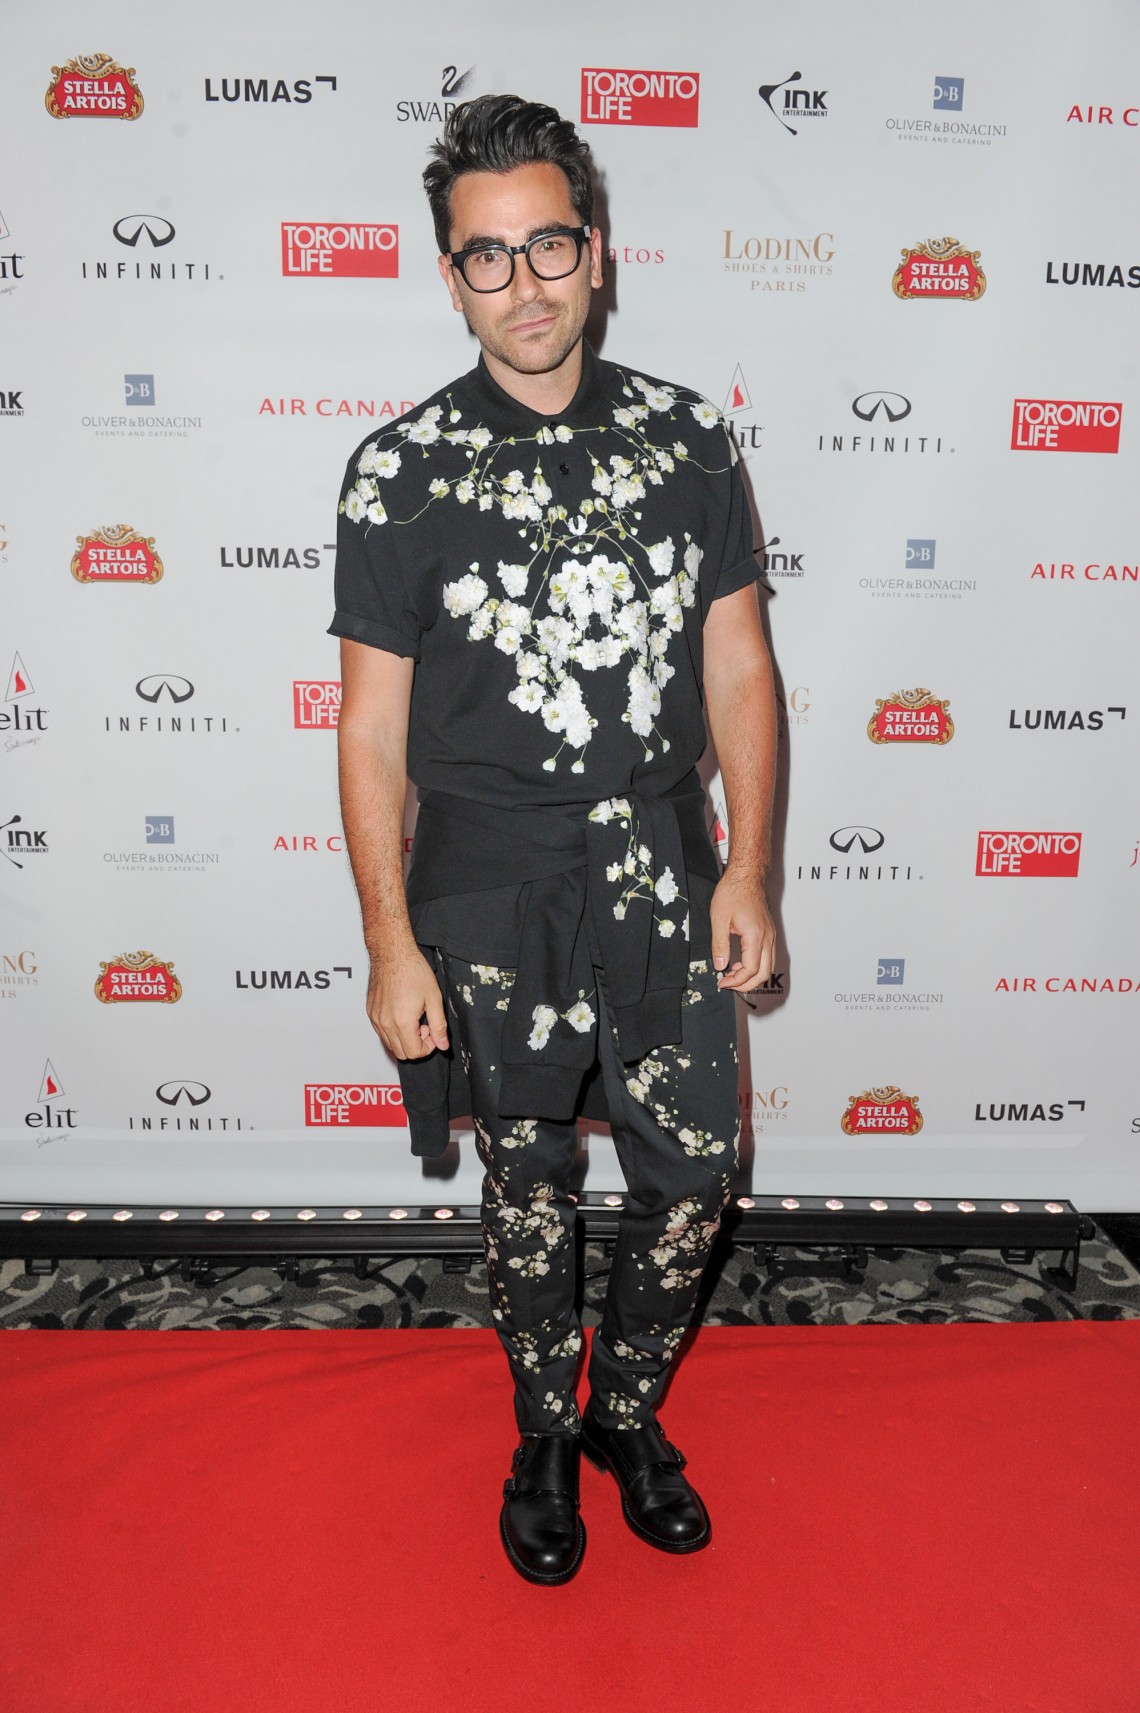 TIFF 2015 Gallery: Red Carpets, Parties & More - Page 6 of 21 - 29Secrets